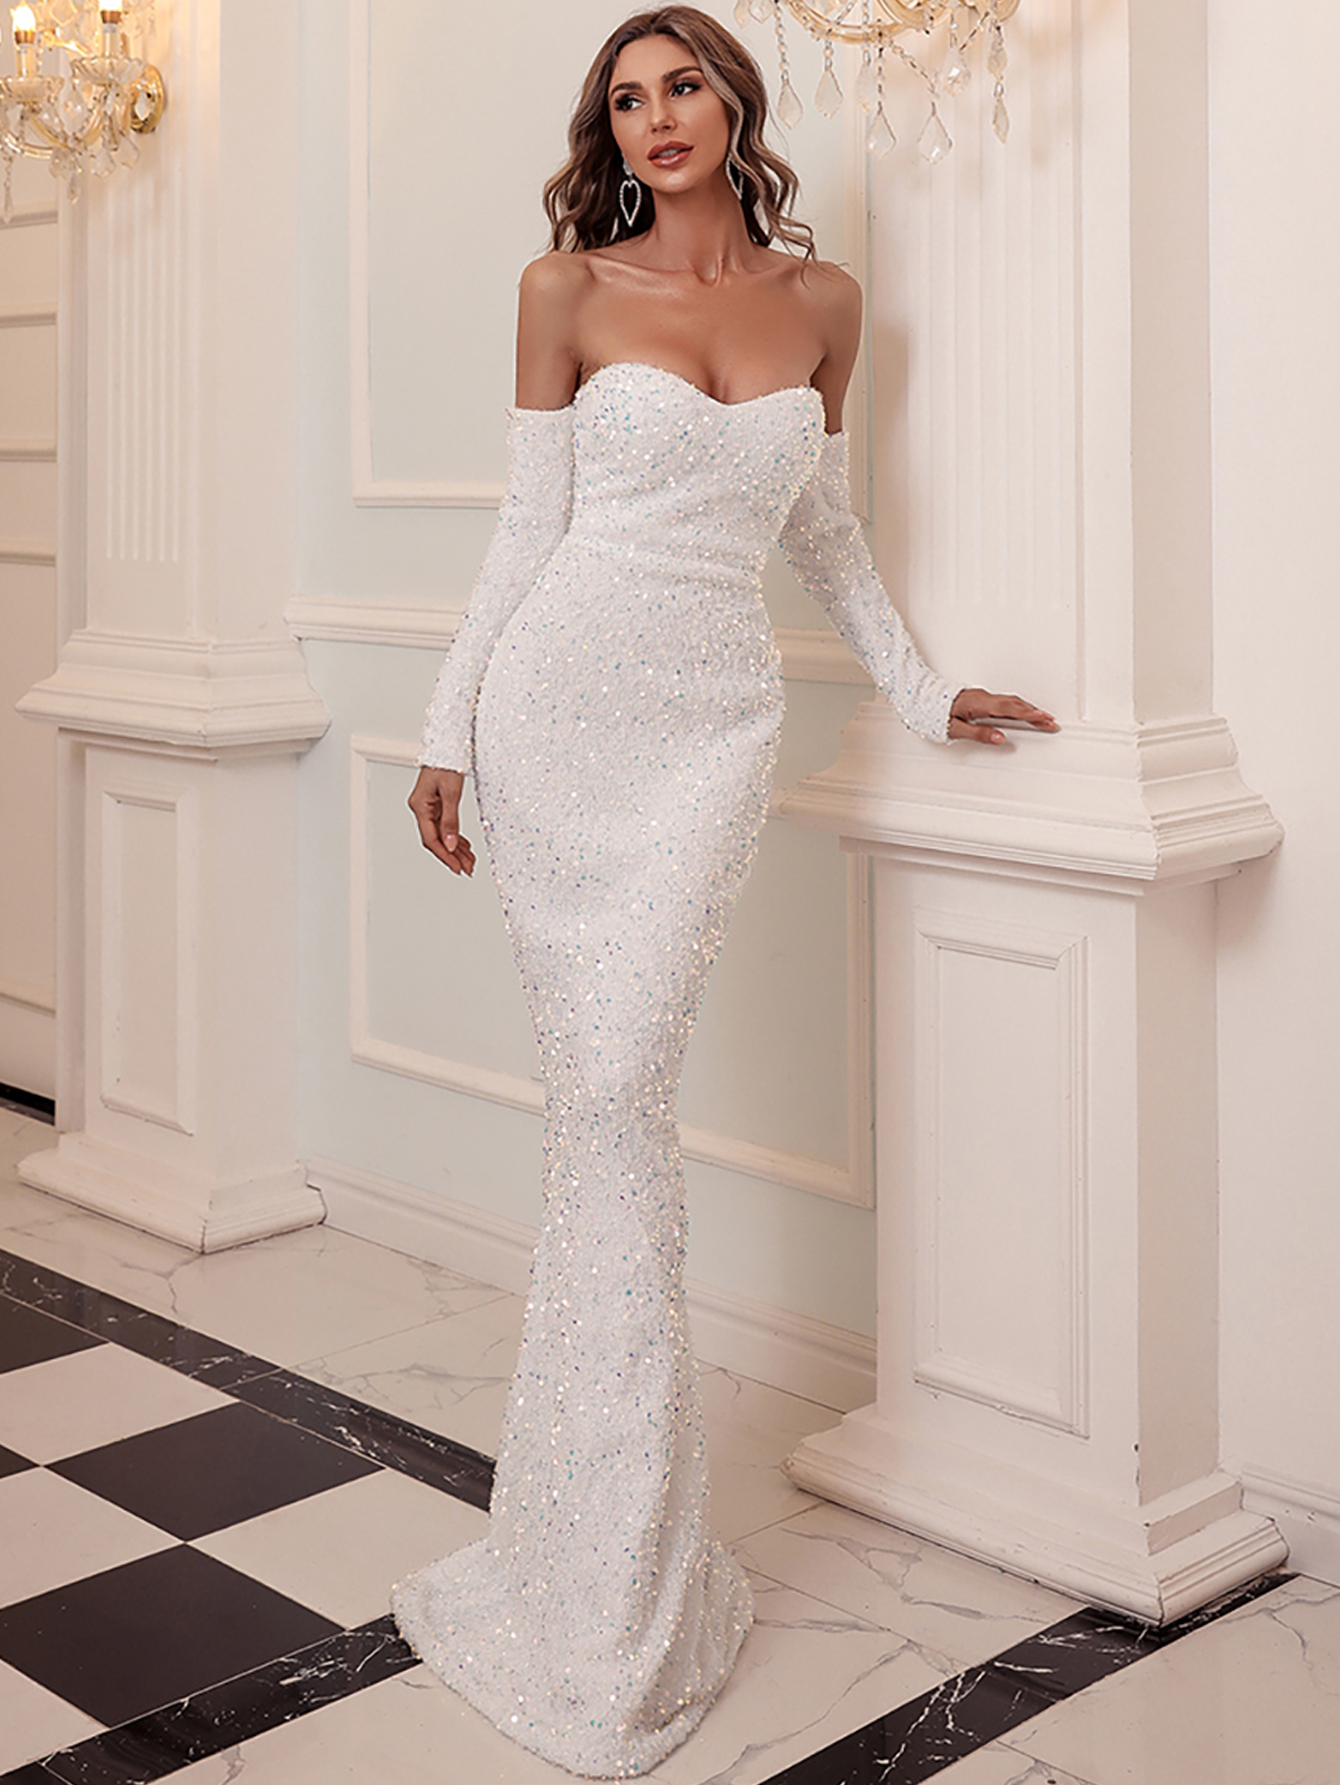 White Sweetheart Neck Off-Shoulder Mermaid Evening Gown